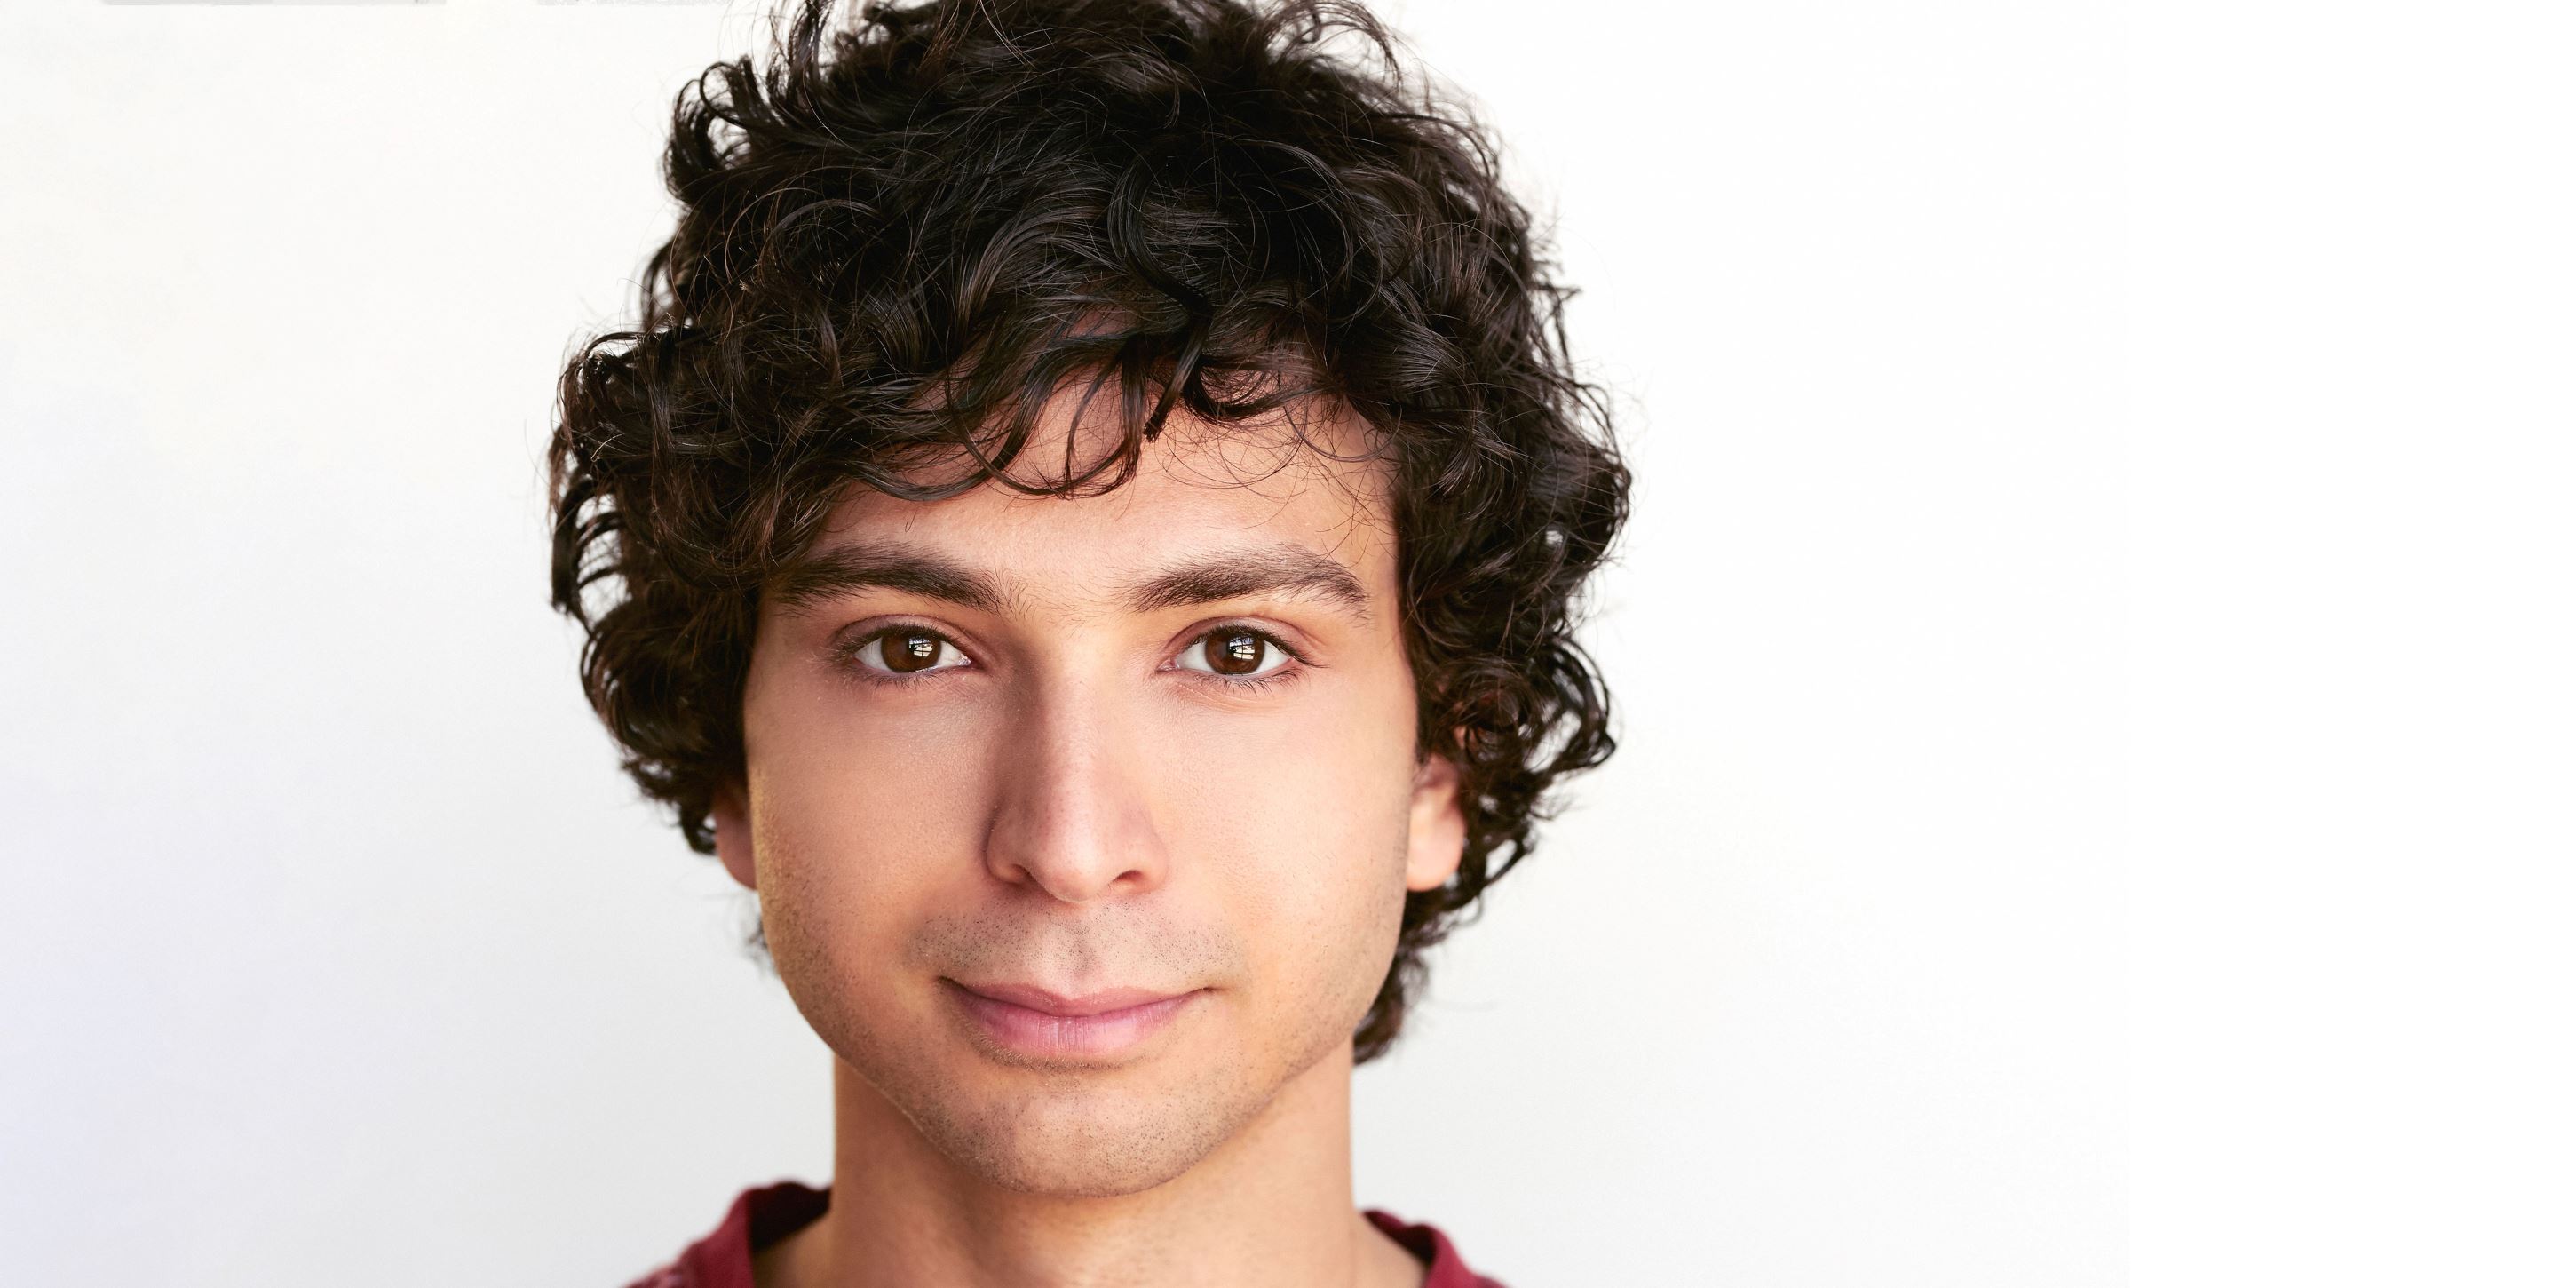 15-mind-blowing-facts-about-adam-g-sevani